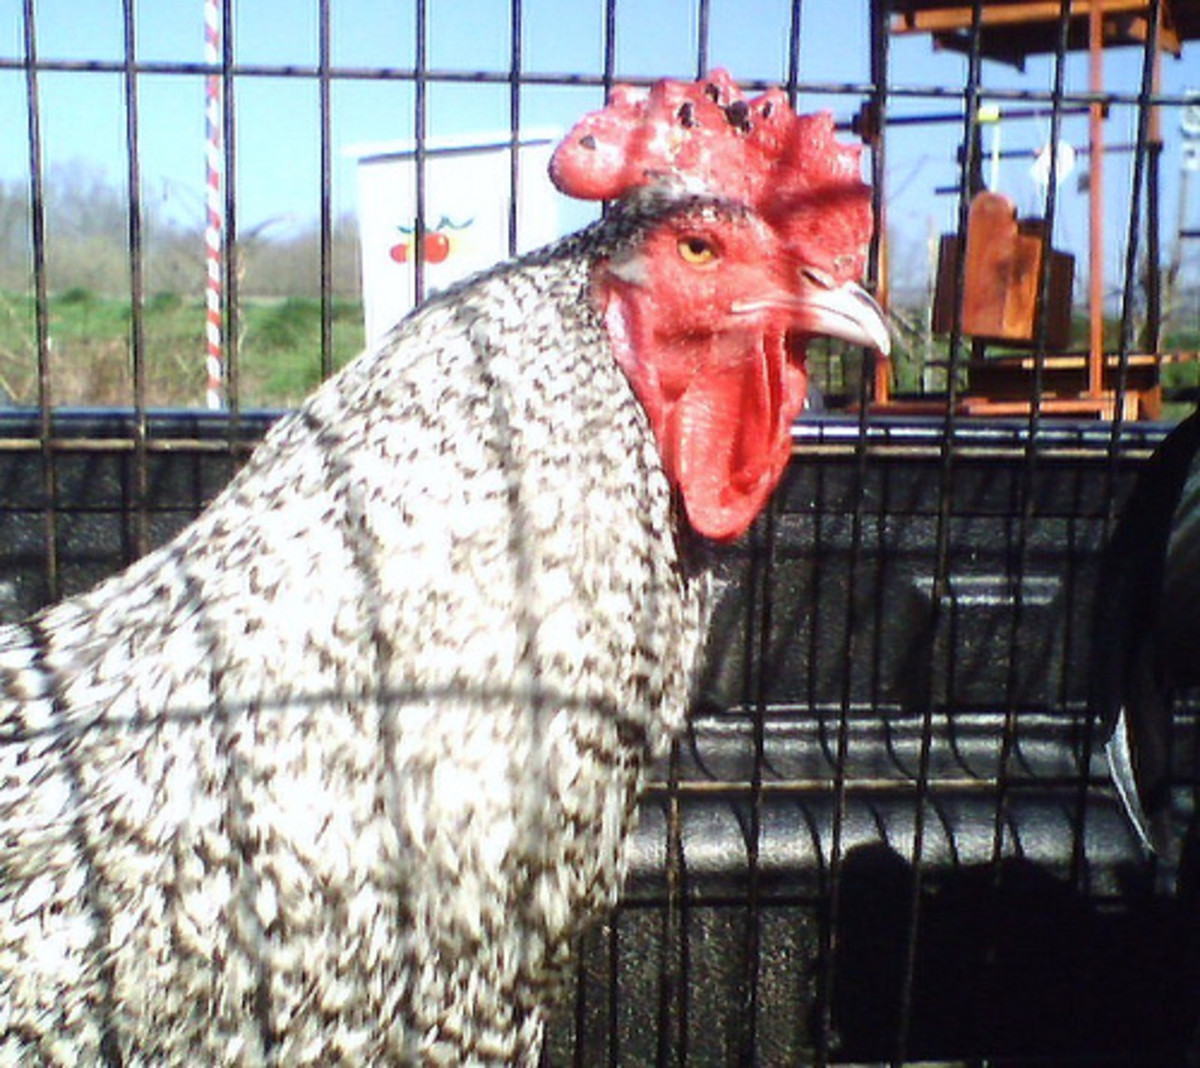 This Barred Plymouth Rock rooster defied the good nature of the Barred Rock reputation for being a friendly bird by being the meanest rooster I had ever met.